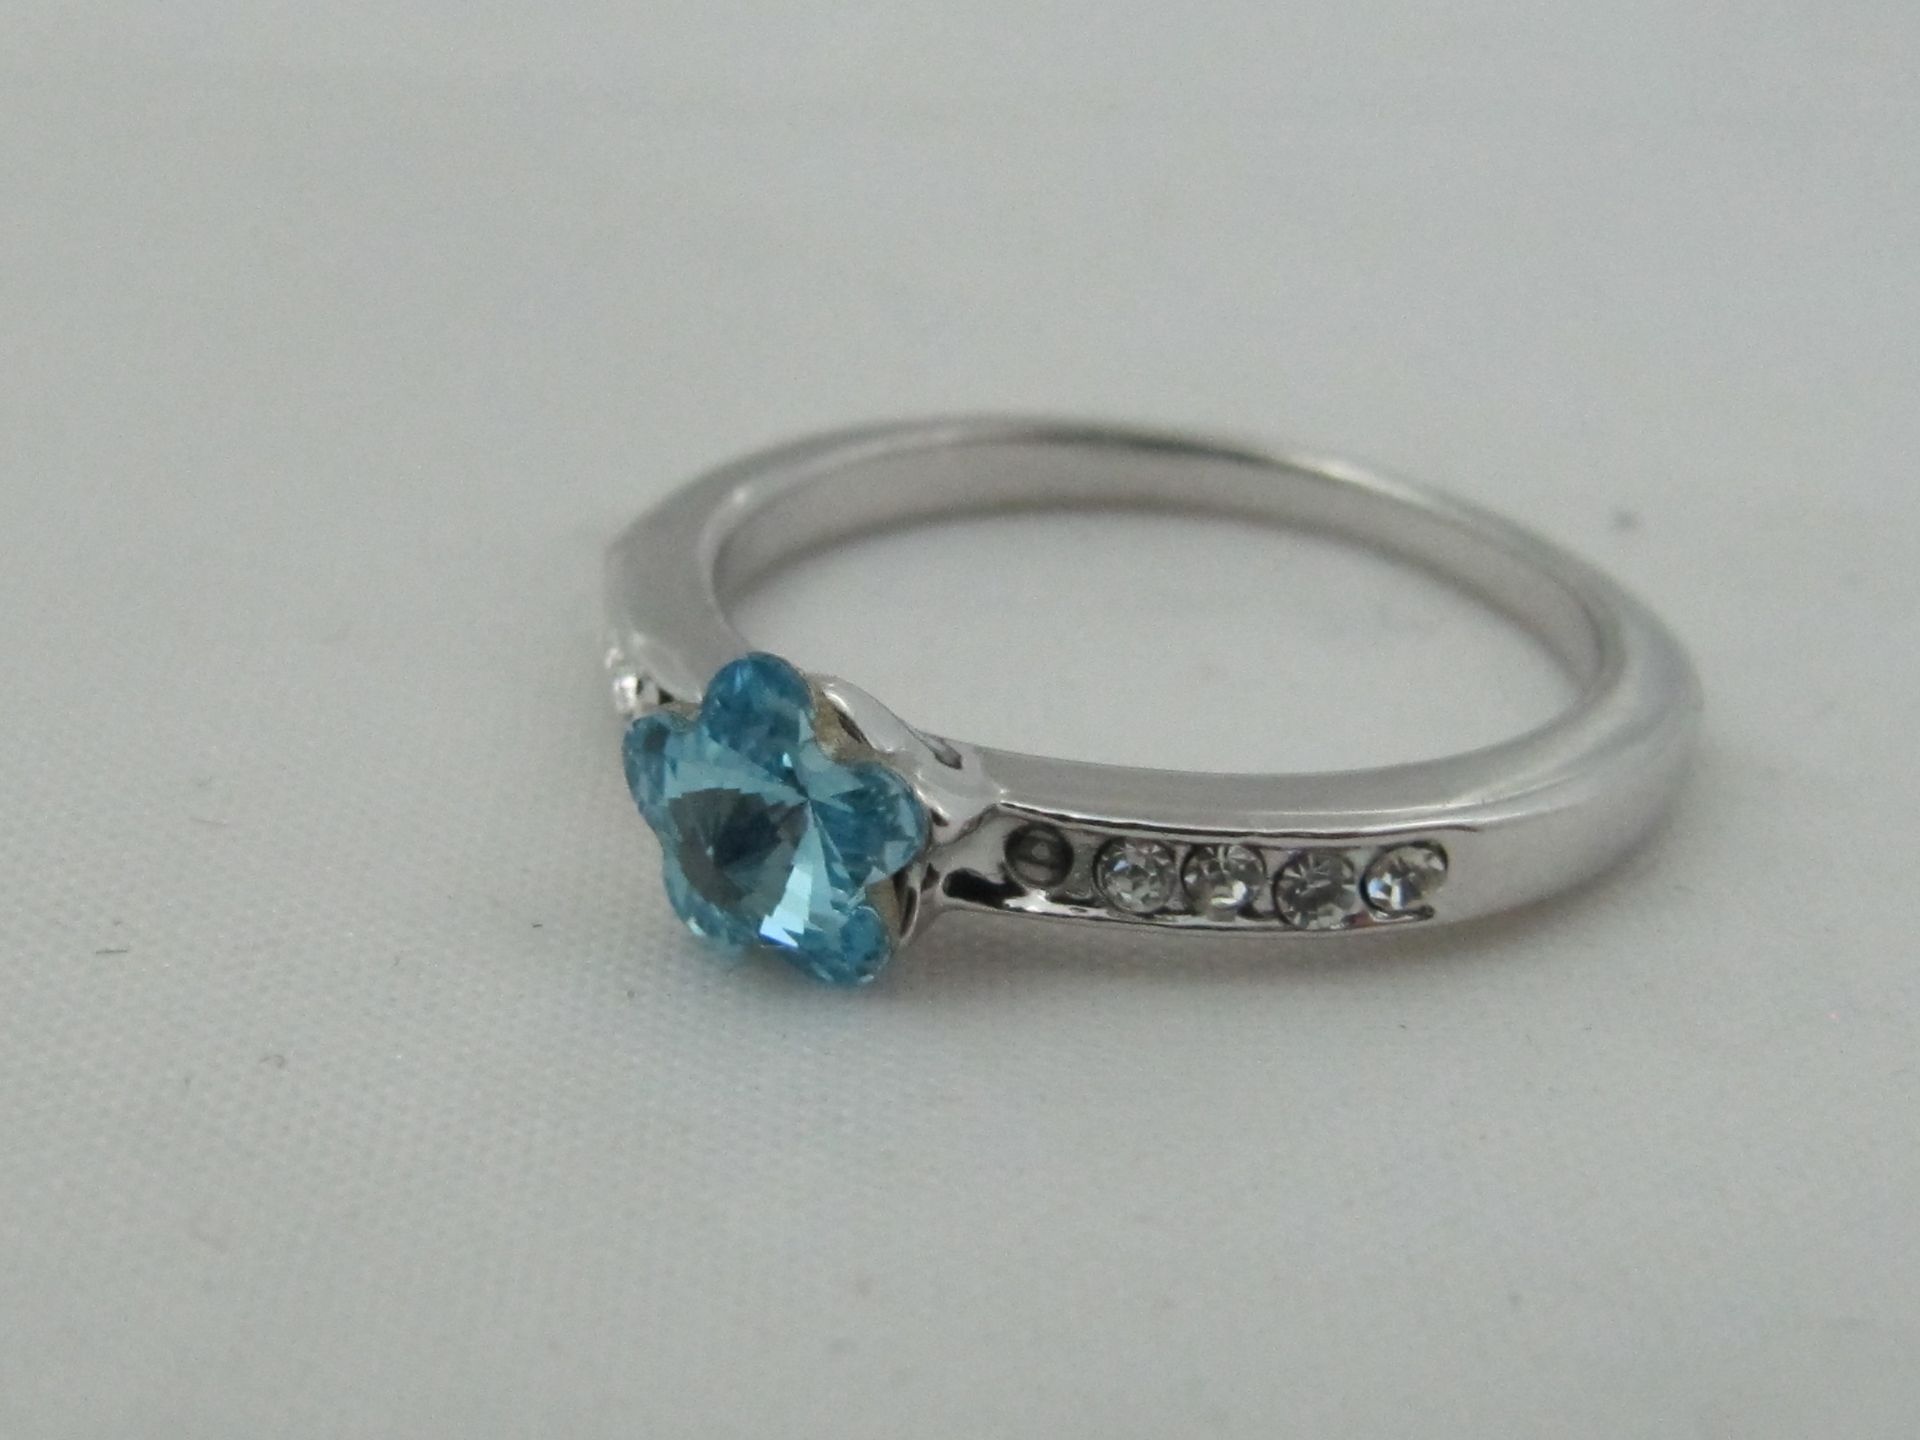 10k White Gold Filled with Blue Sapphire. Size N. - Image 4 of 7